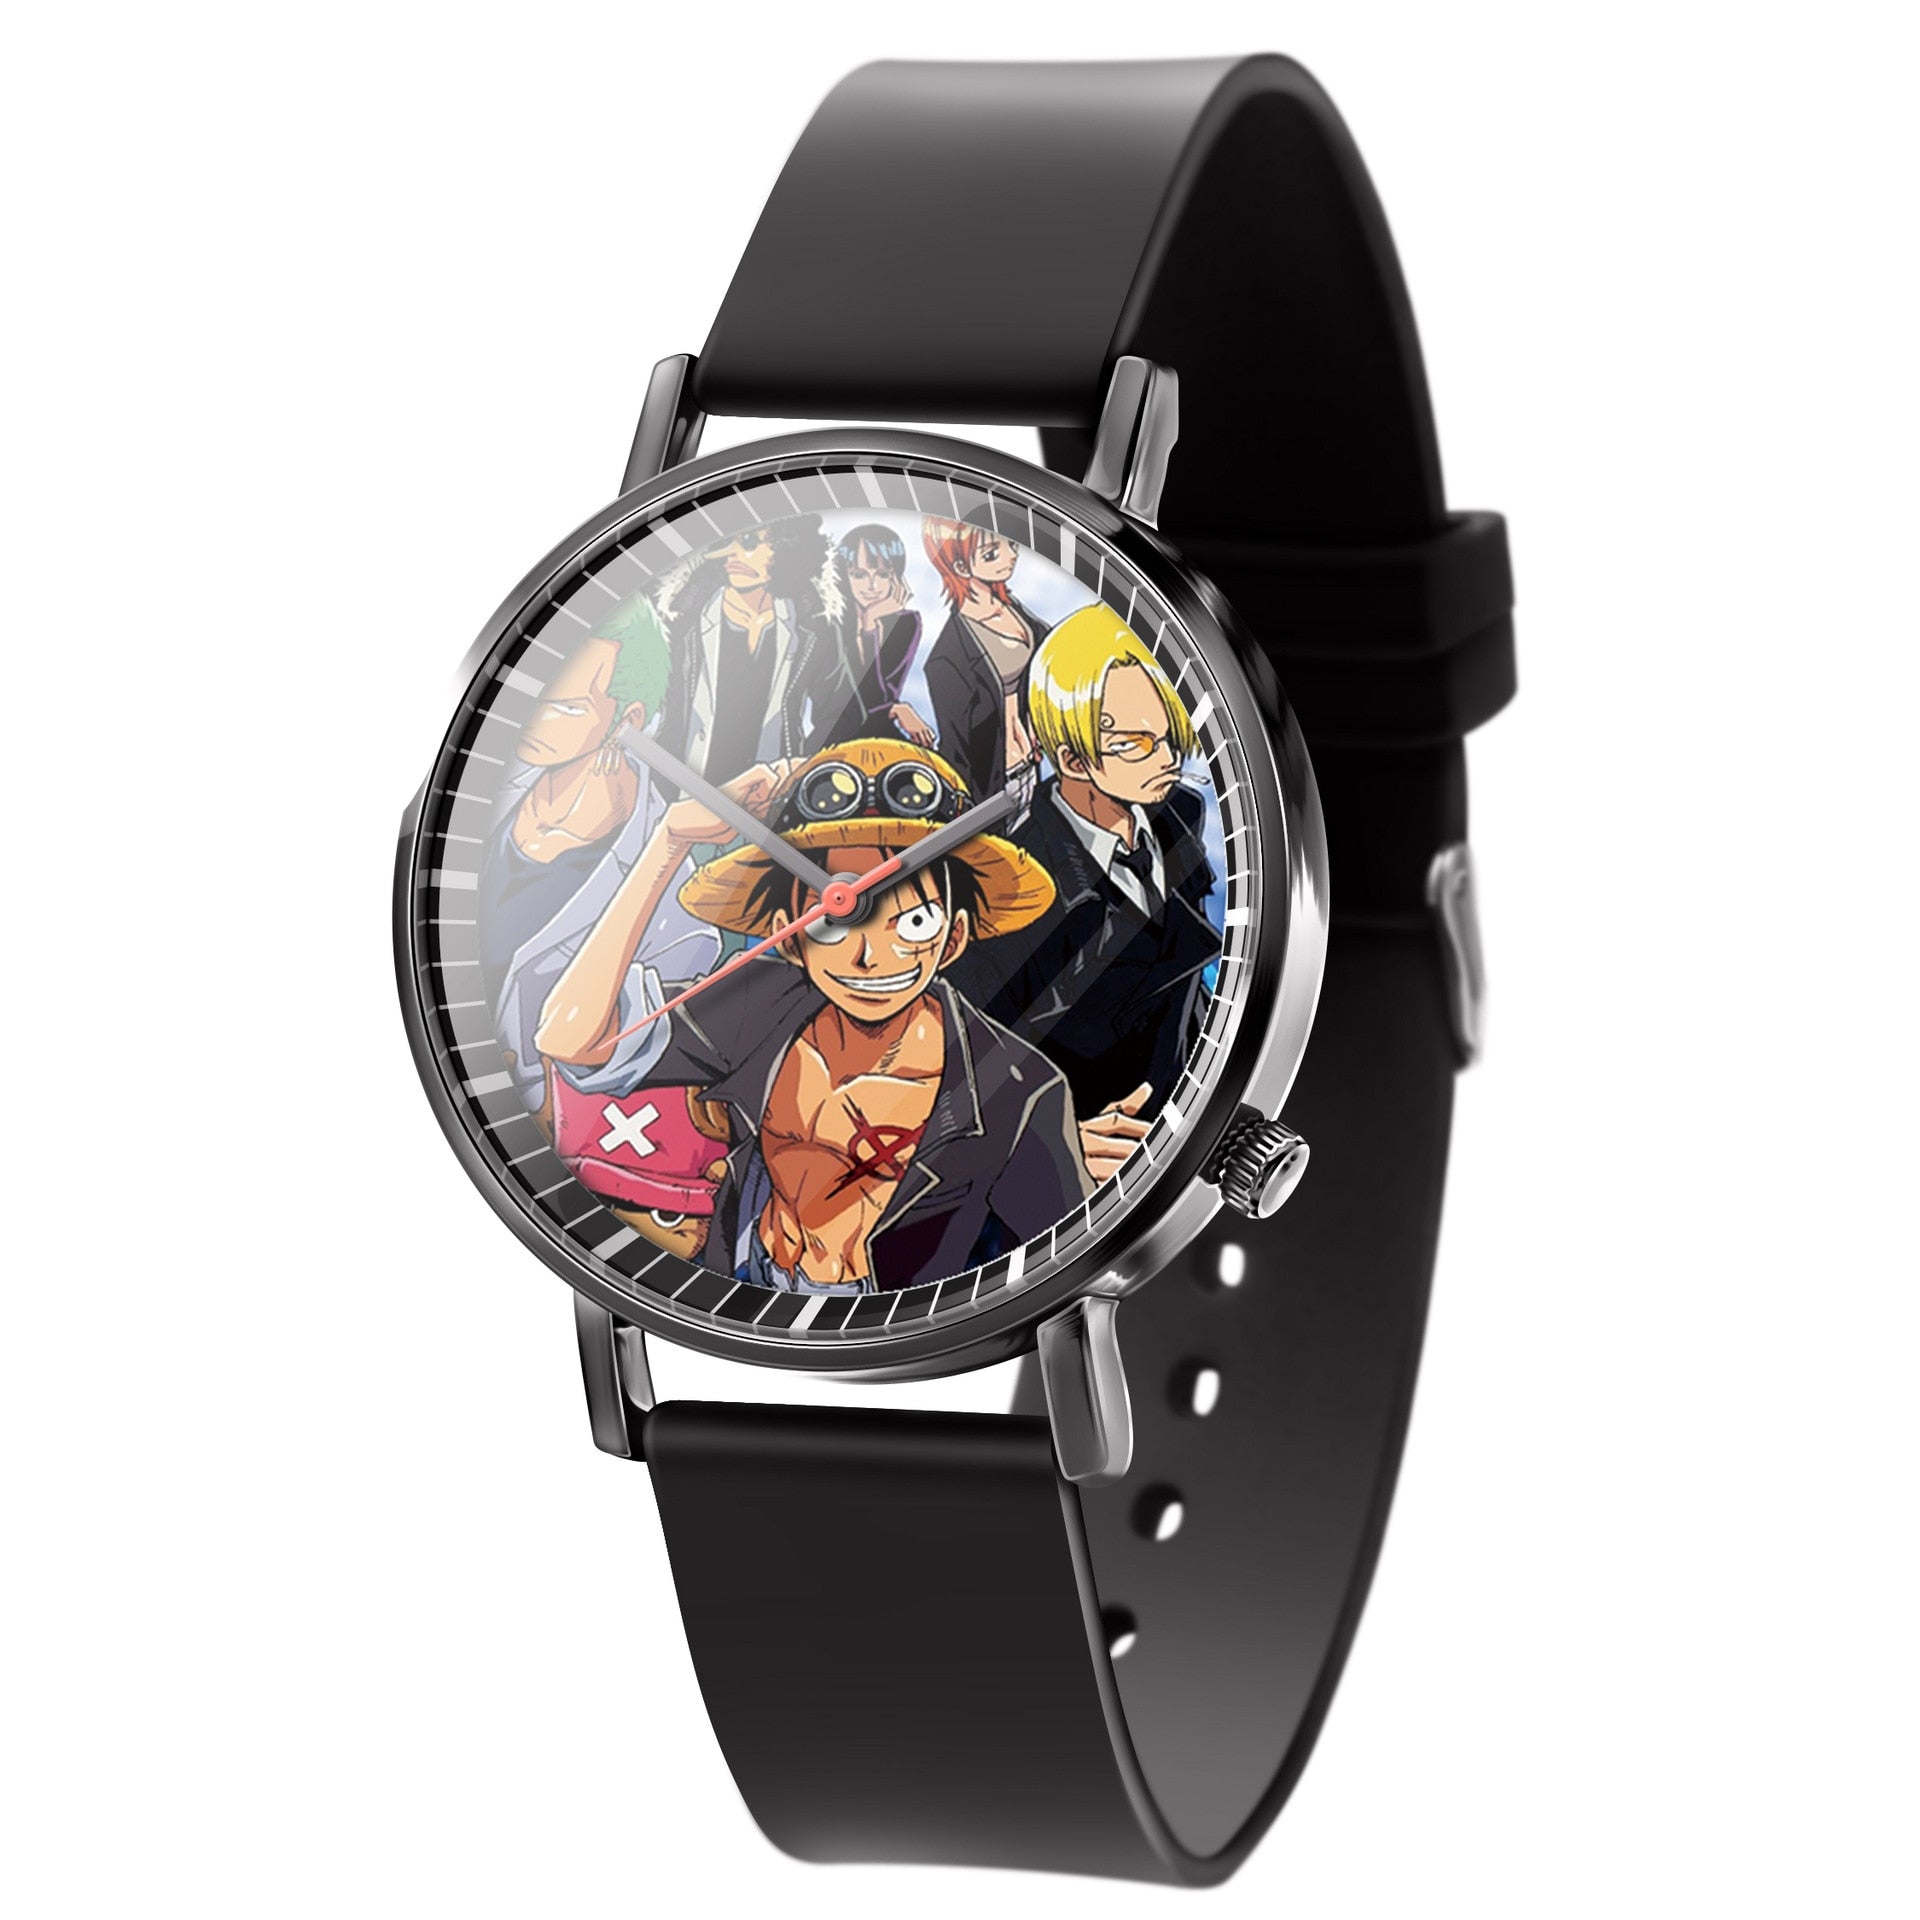 Anime Characters Childrens Art Deco Wristwatches With Silicone Luminous  Strap Perfect Party Gift For Boys And Girls From Hectorryat, $13.68 |  DHgate.Com